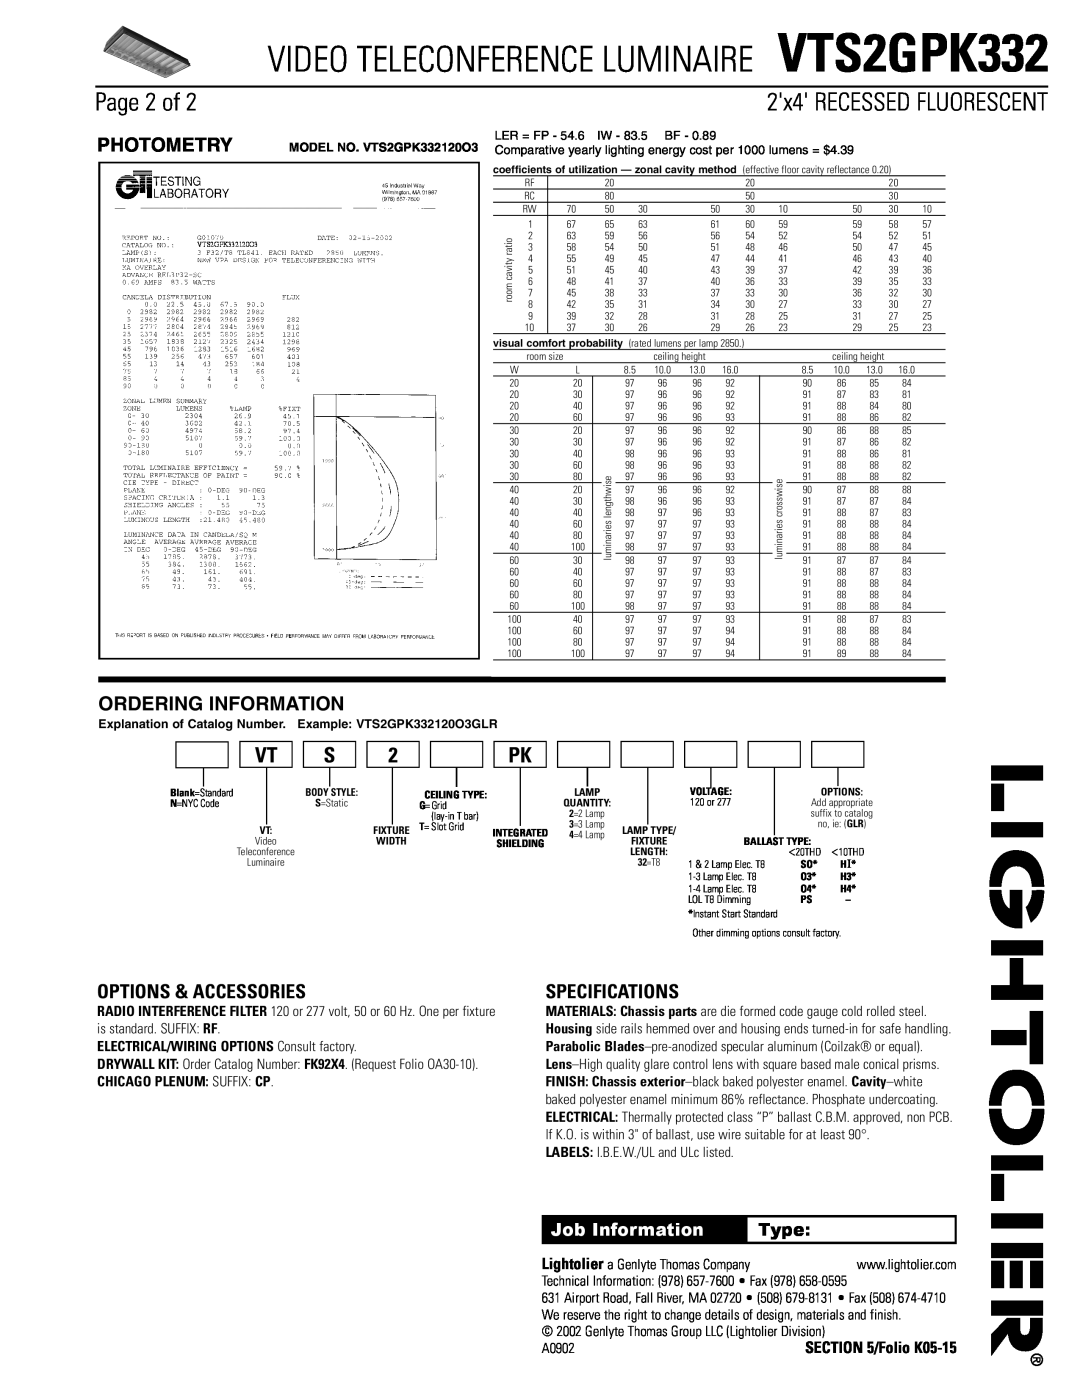 Lightolier Page 2 of, Options & Accessories, Specifications, VIDEO TELECONFERENCE LUMINAIRE VTS2GPK332, Photometry 